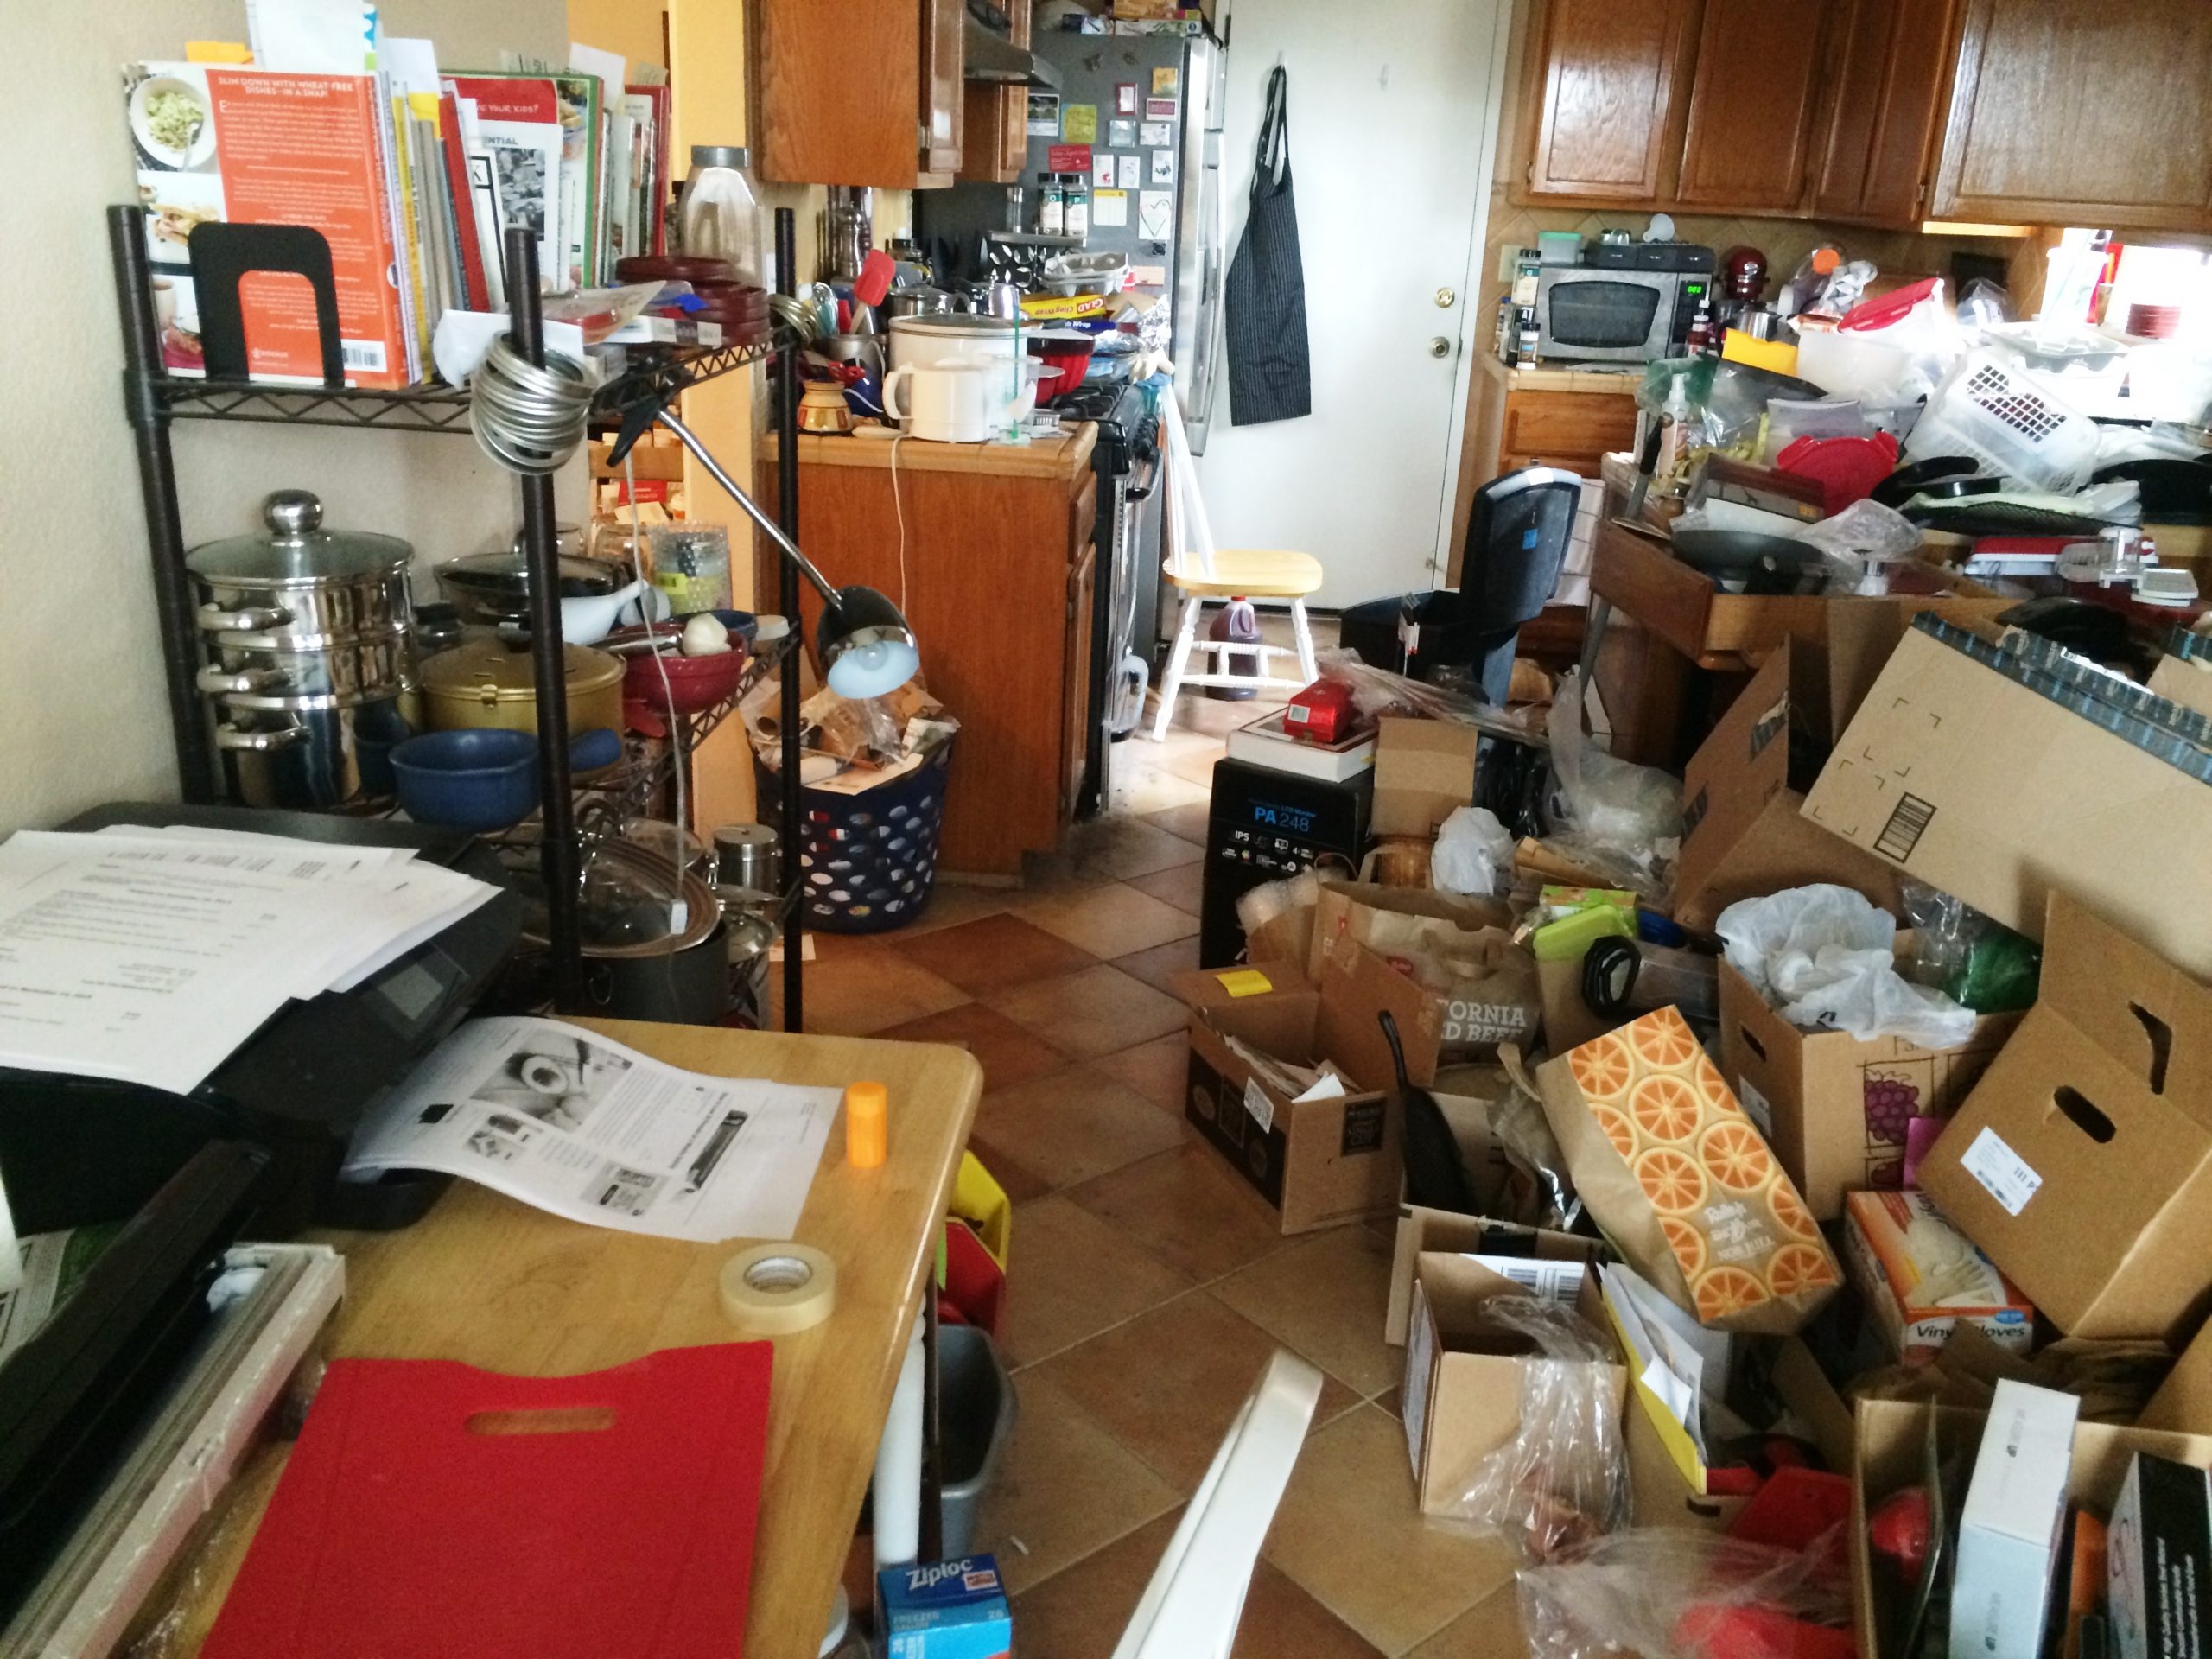 Kitchen cluttered with boxes, before organizing